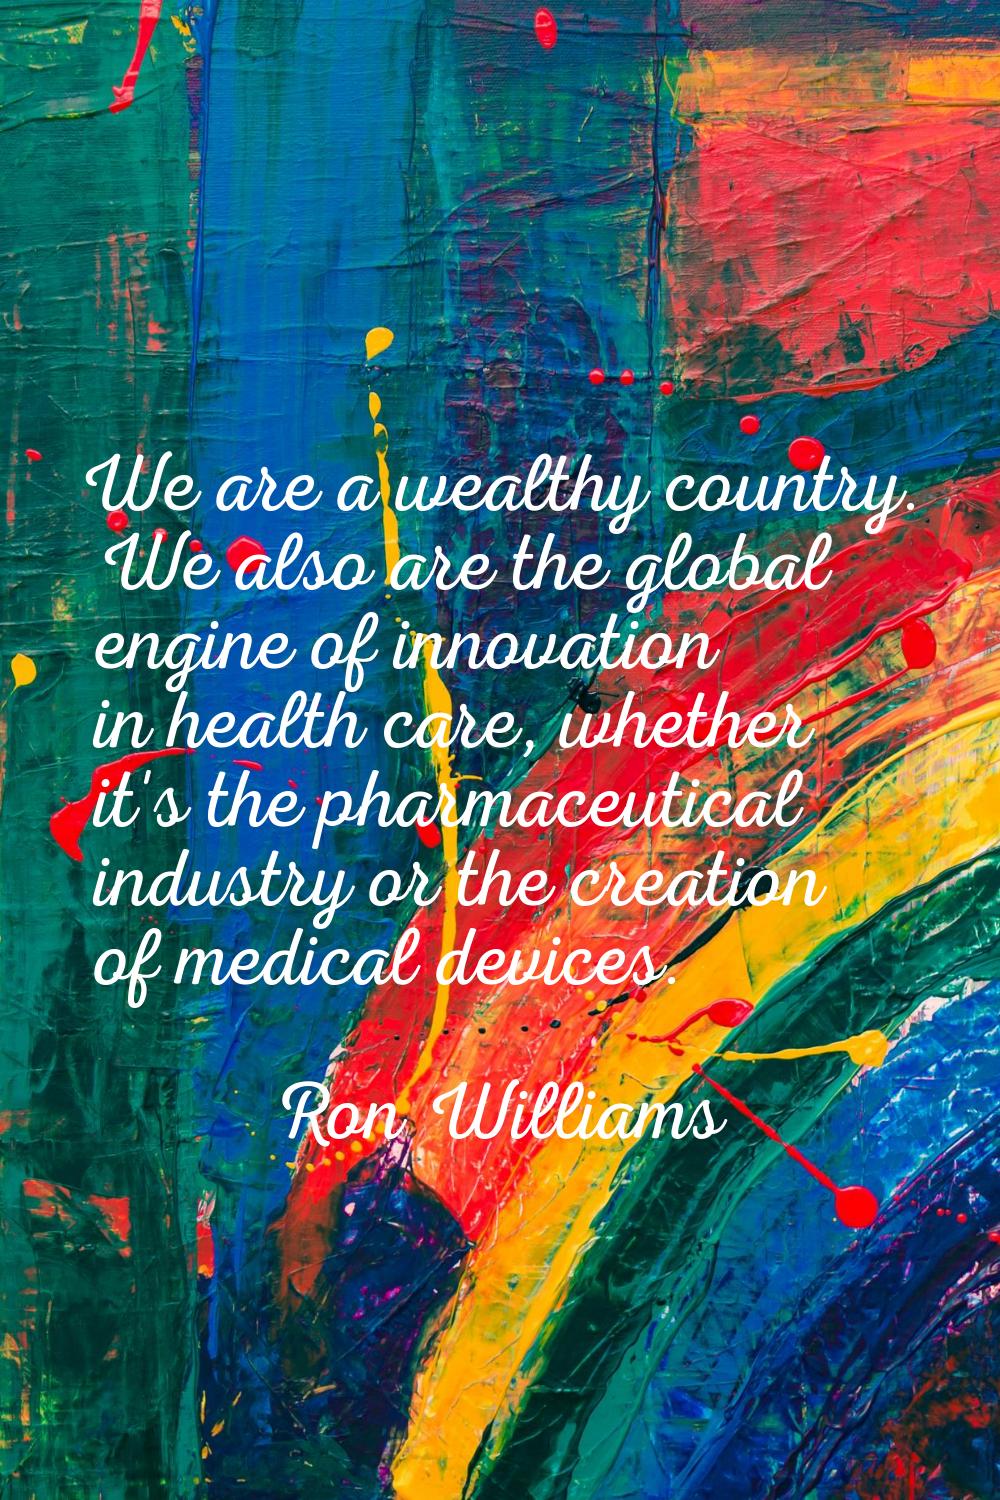 We are a wealthy country. We also are the global engine of innovation in health care, whether it's 